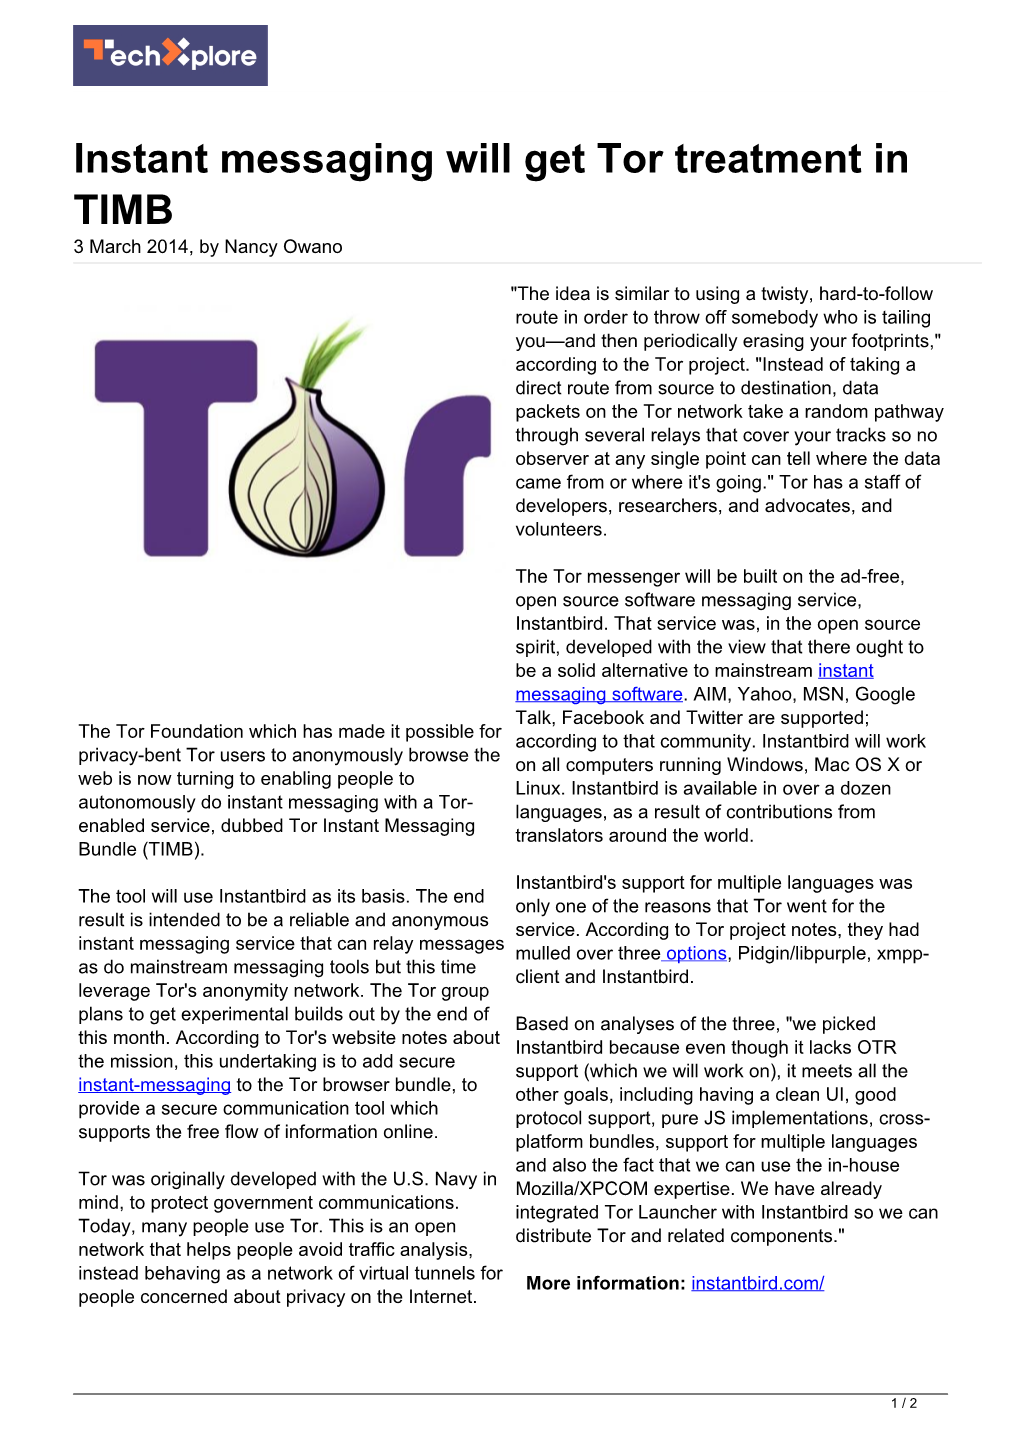 Instant Messaging Will Get Tor Treatment in TIMB 3 March 2014, by Nancy Owano